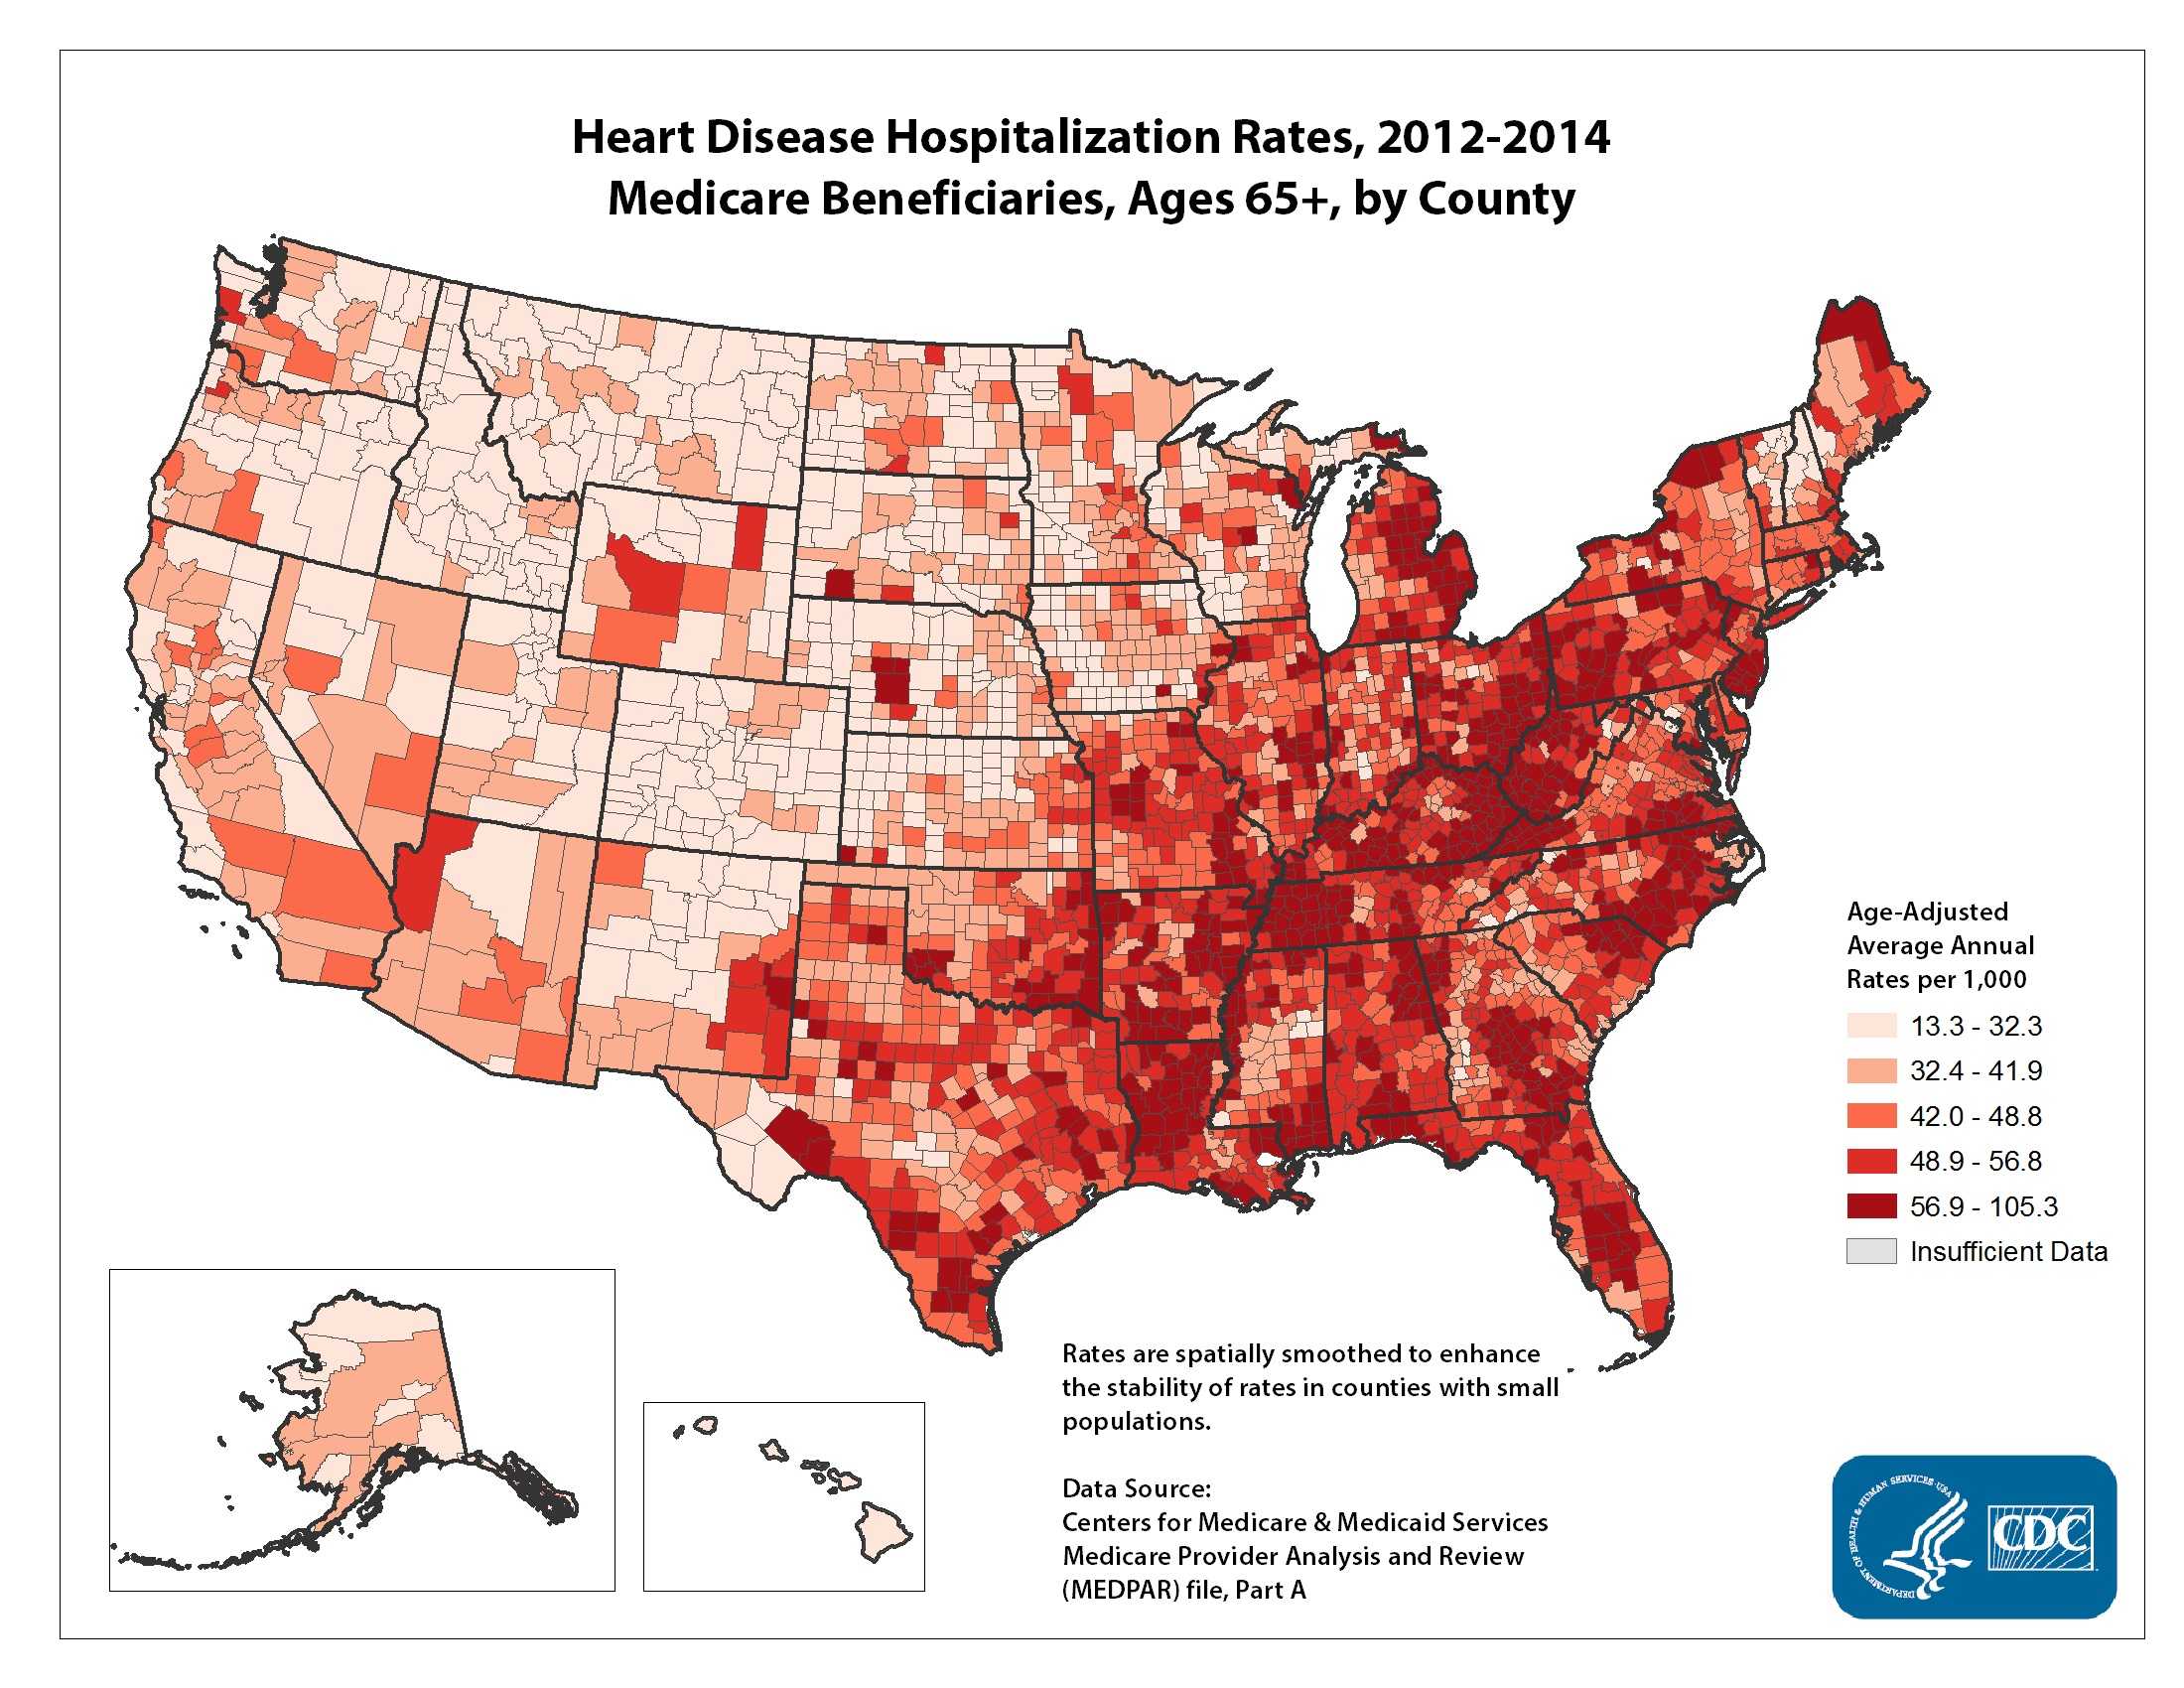 Heart Disease Hospitalization Rates for 2010 through 2012 for Adults Aged 65 Years and Older by County. The map shows that concentrations of counties with the highest heart disease hospitalization rates - meaning the top quintile - are located primarily in Louisiana, Kentucky, West Virginia, Pennsylvania, and Tennessee. Pockets of high-rate counties also were found in Alabama, Georgia, North Carolina, Mississippi, Arkansas, Missouri, Texas, and Michigan.